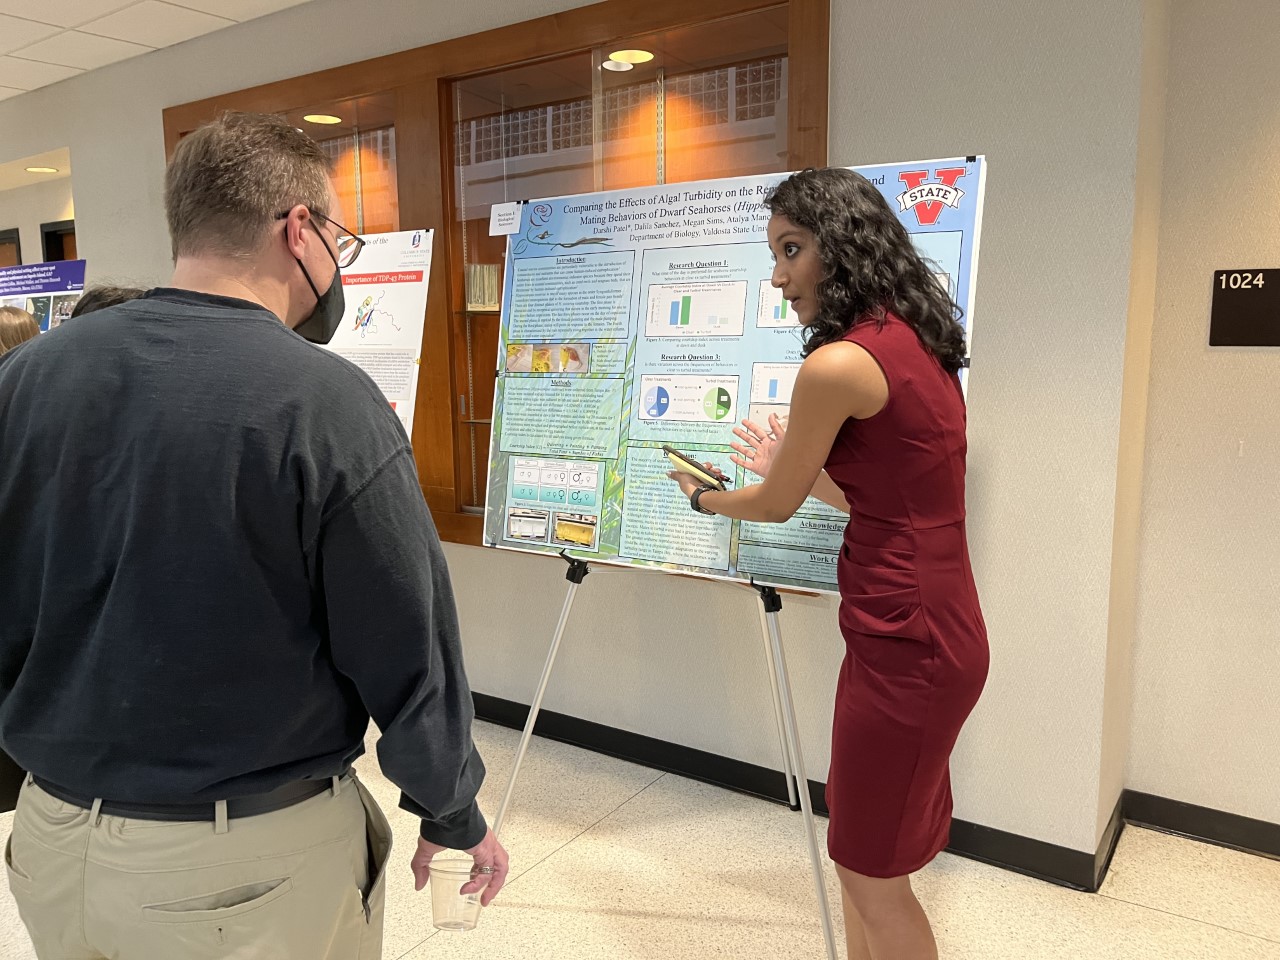 BSRI students present their work at state and national conferences